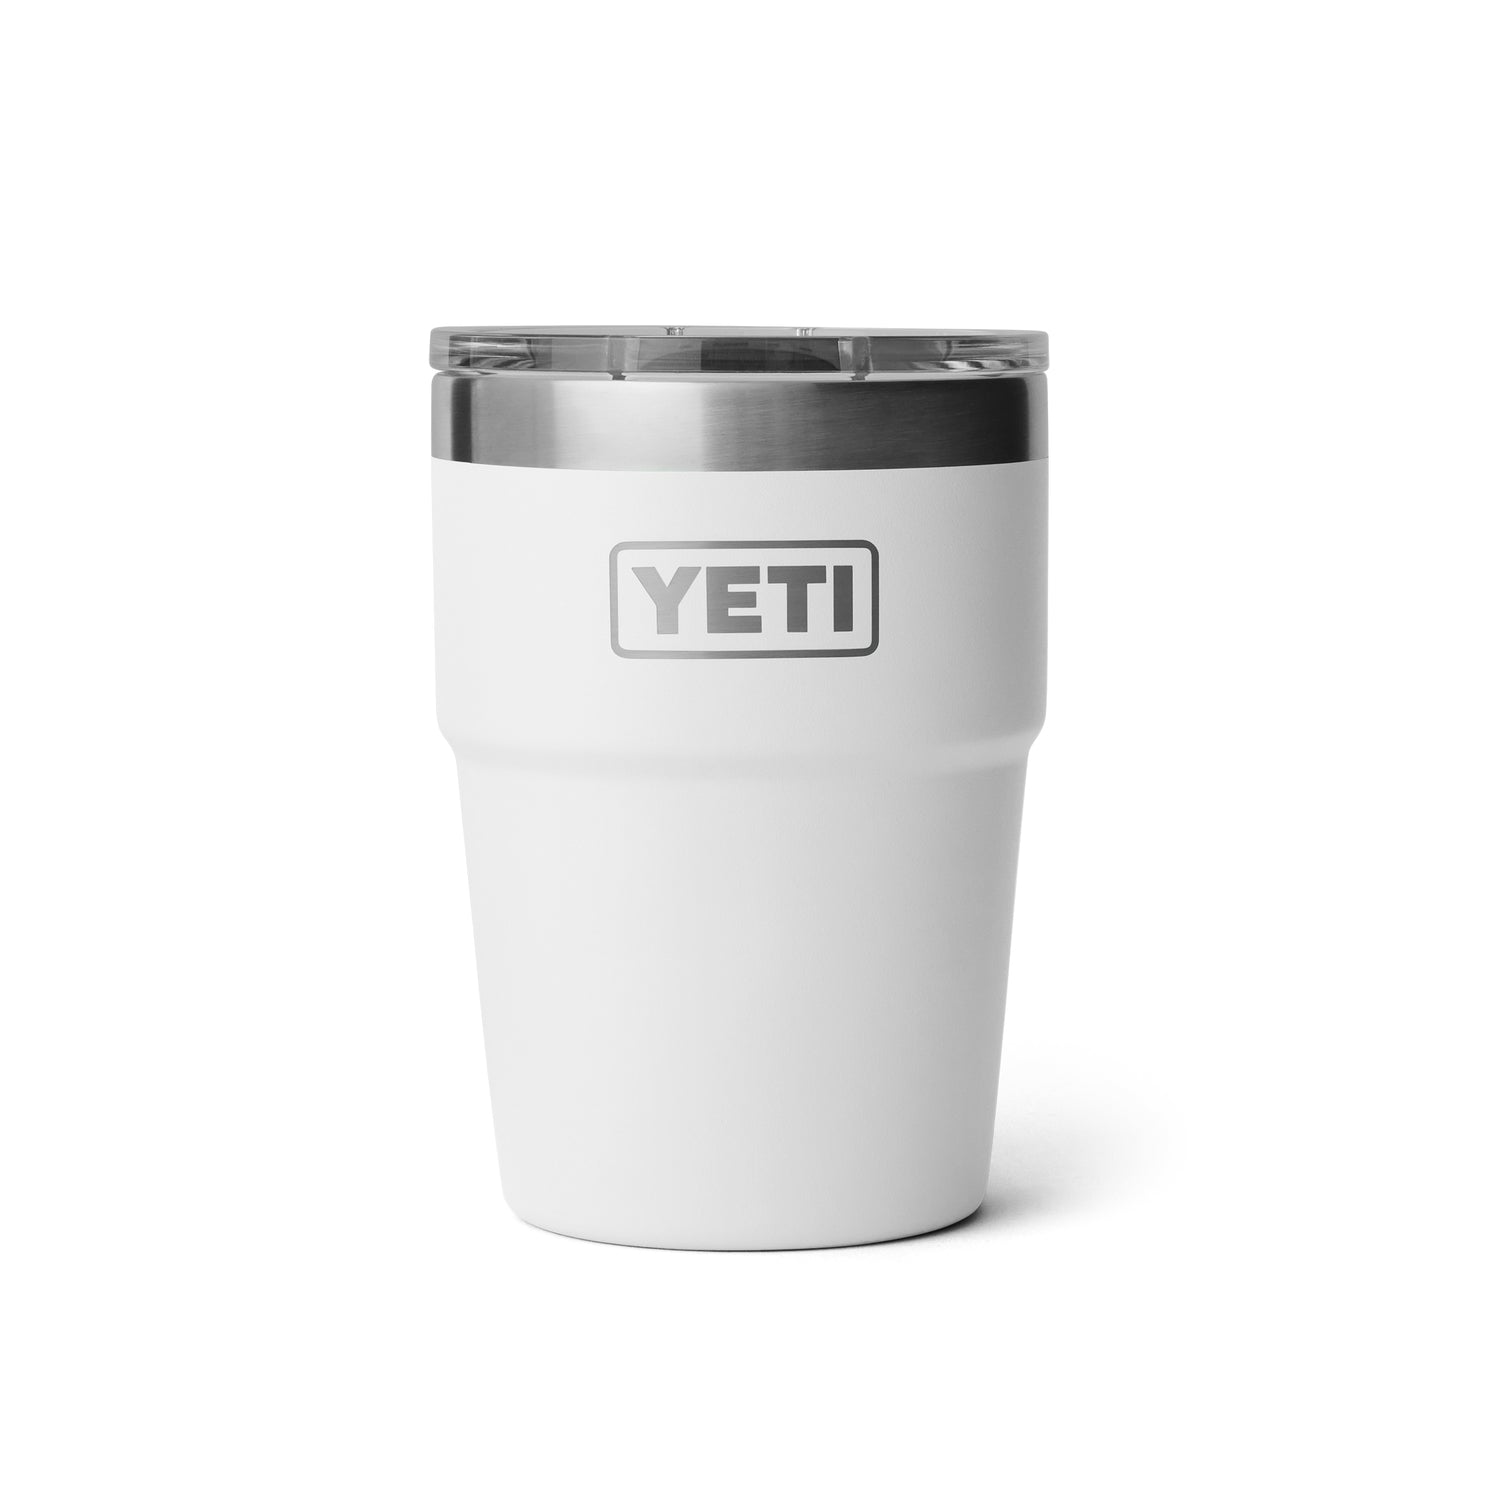 21071502848_70000002614_YETI_Wholesale_drinkware_Stackable_R16_White_Front_2877_B_2400x2400.jpg